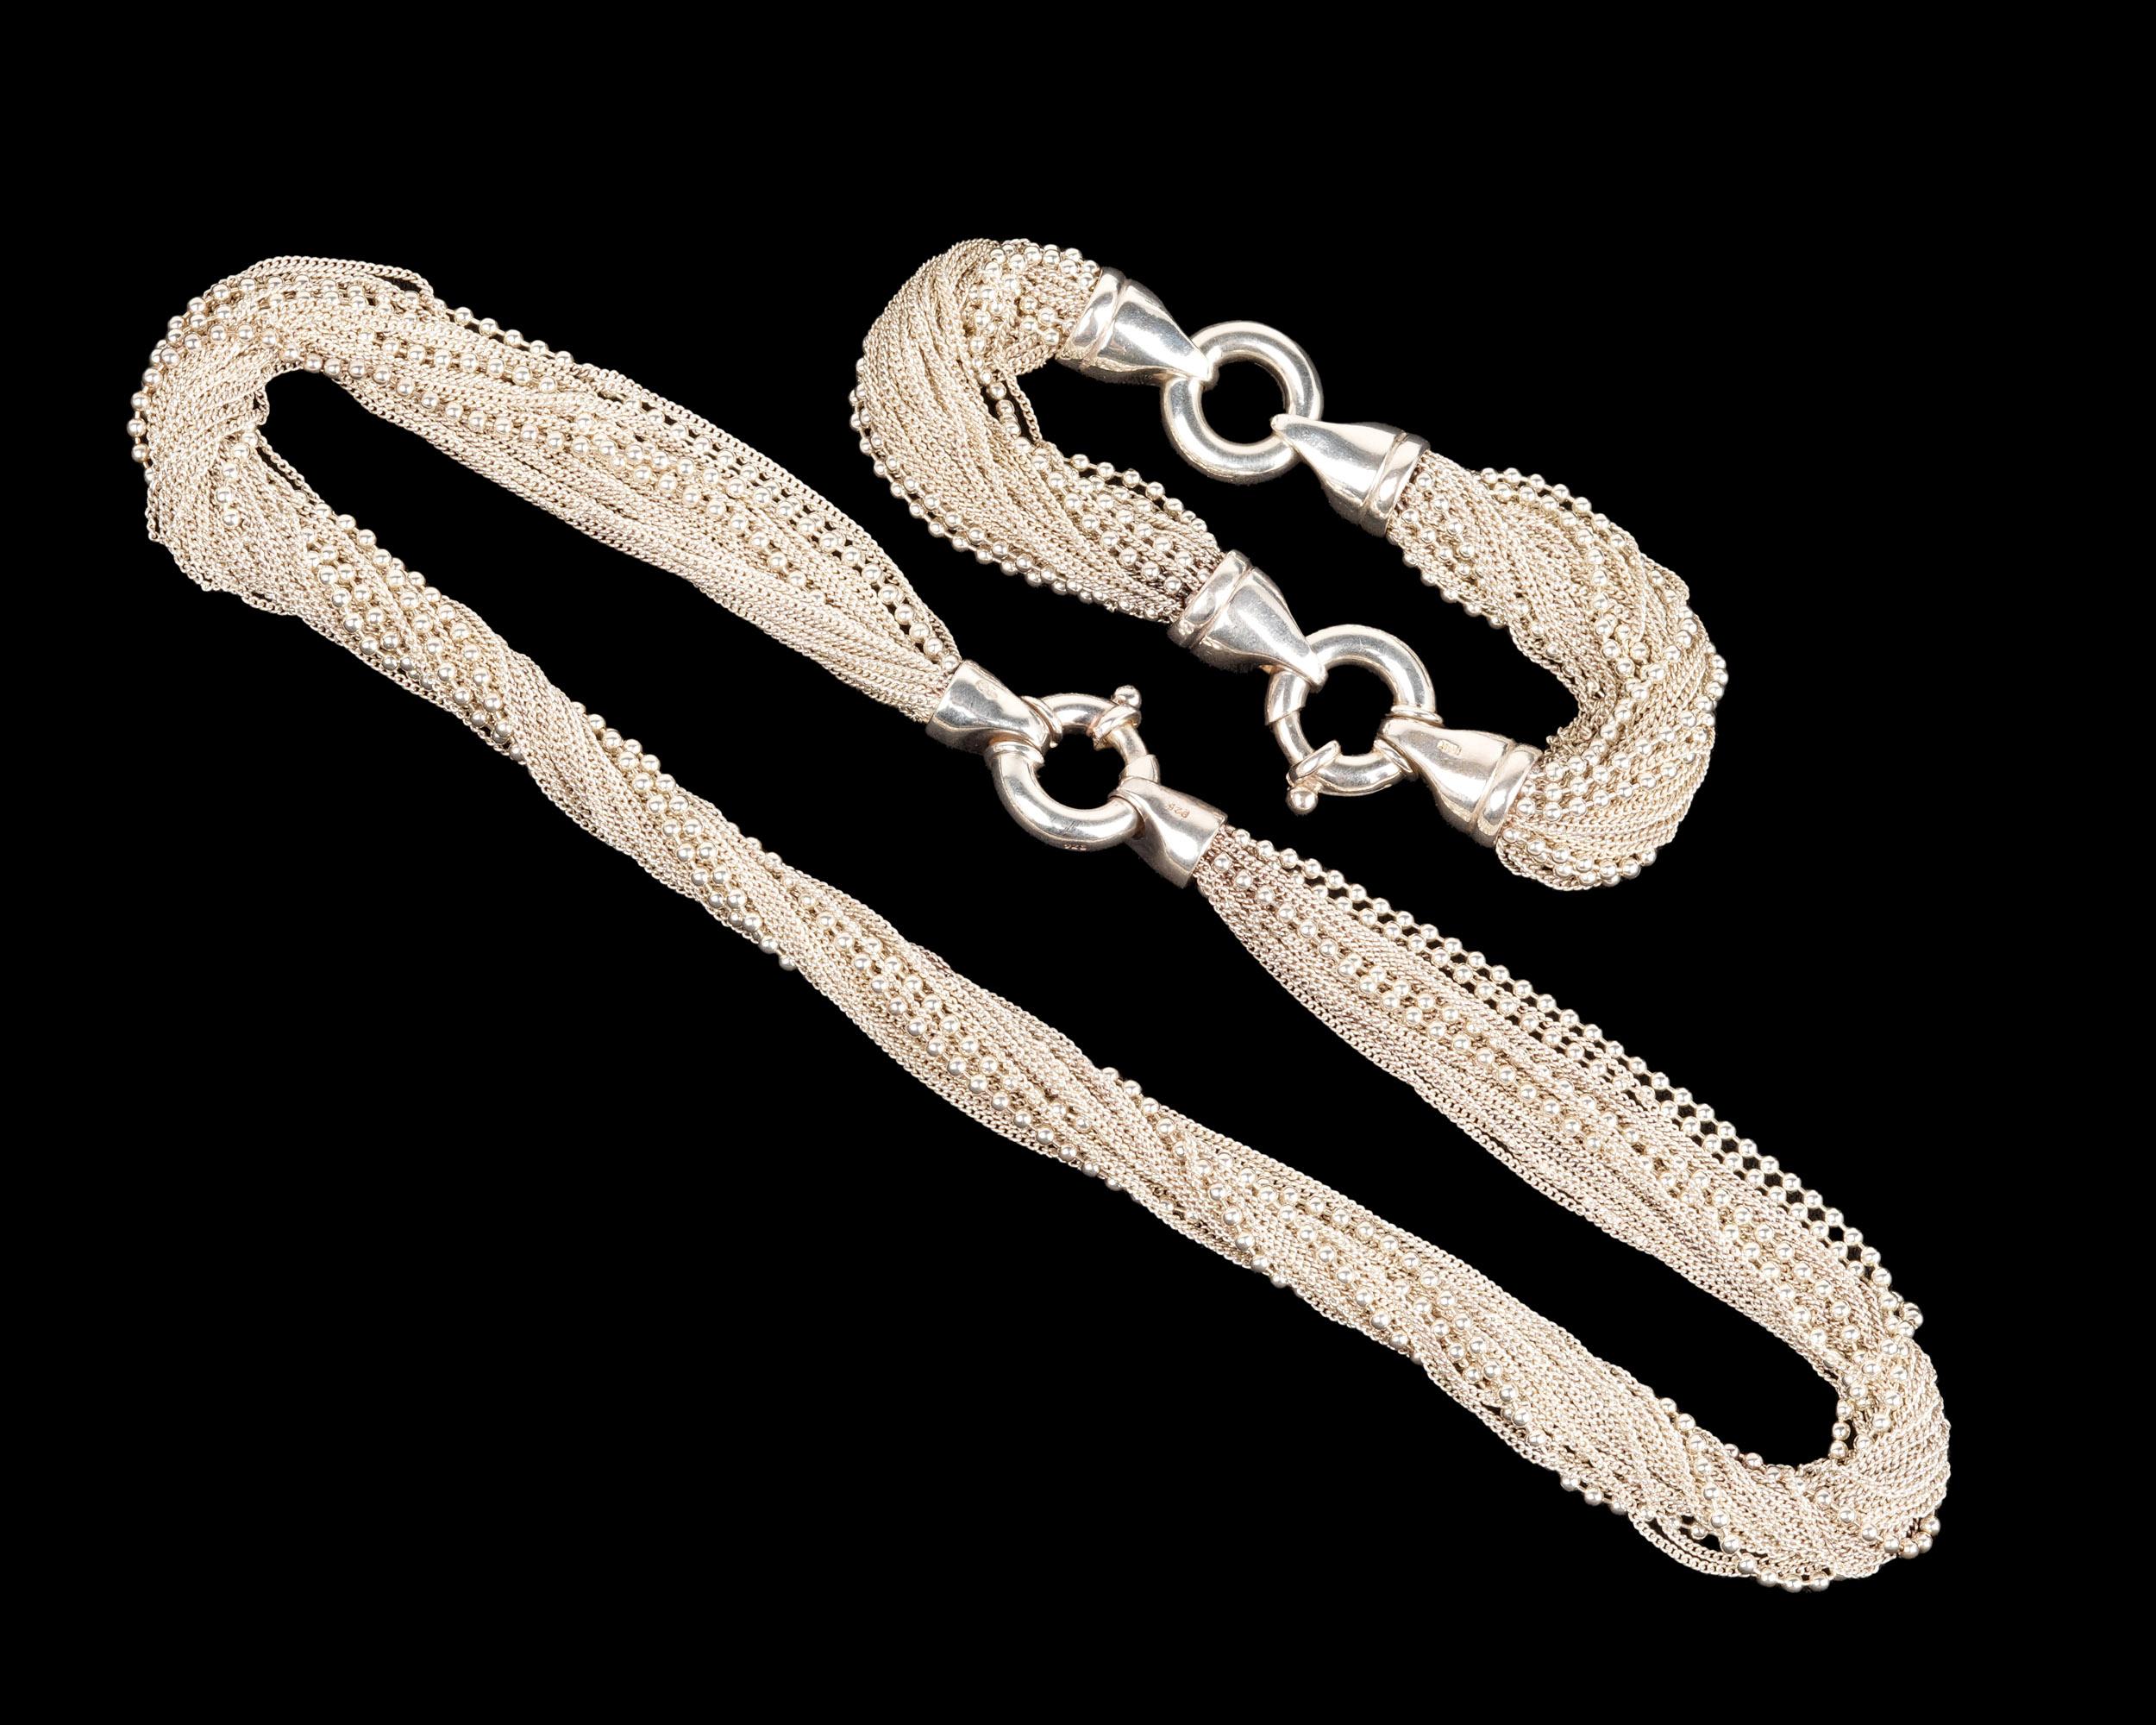 Sonya Ooten multi strand twisted white bead and mesh necklace and bracelet set. Bracelet is 7.5 inches long and may also be used as an extender for the necklace. Each is marked with Ooten cipher and 925. Approximately 3.1 troy ounces. 